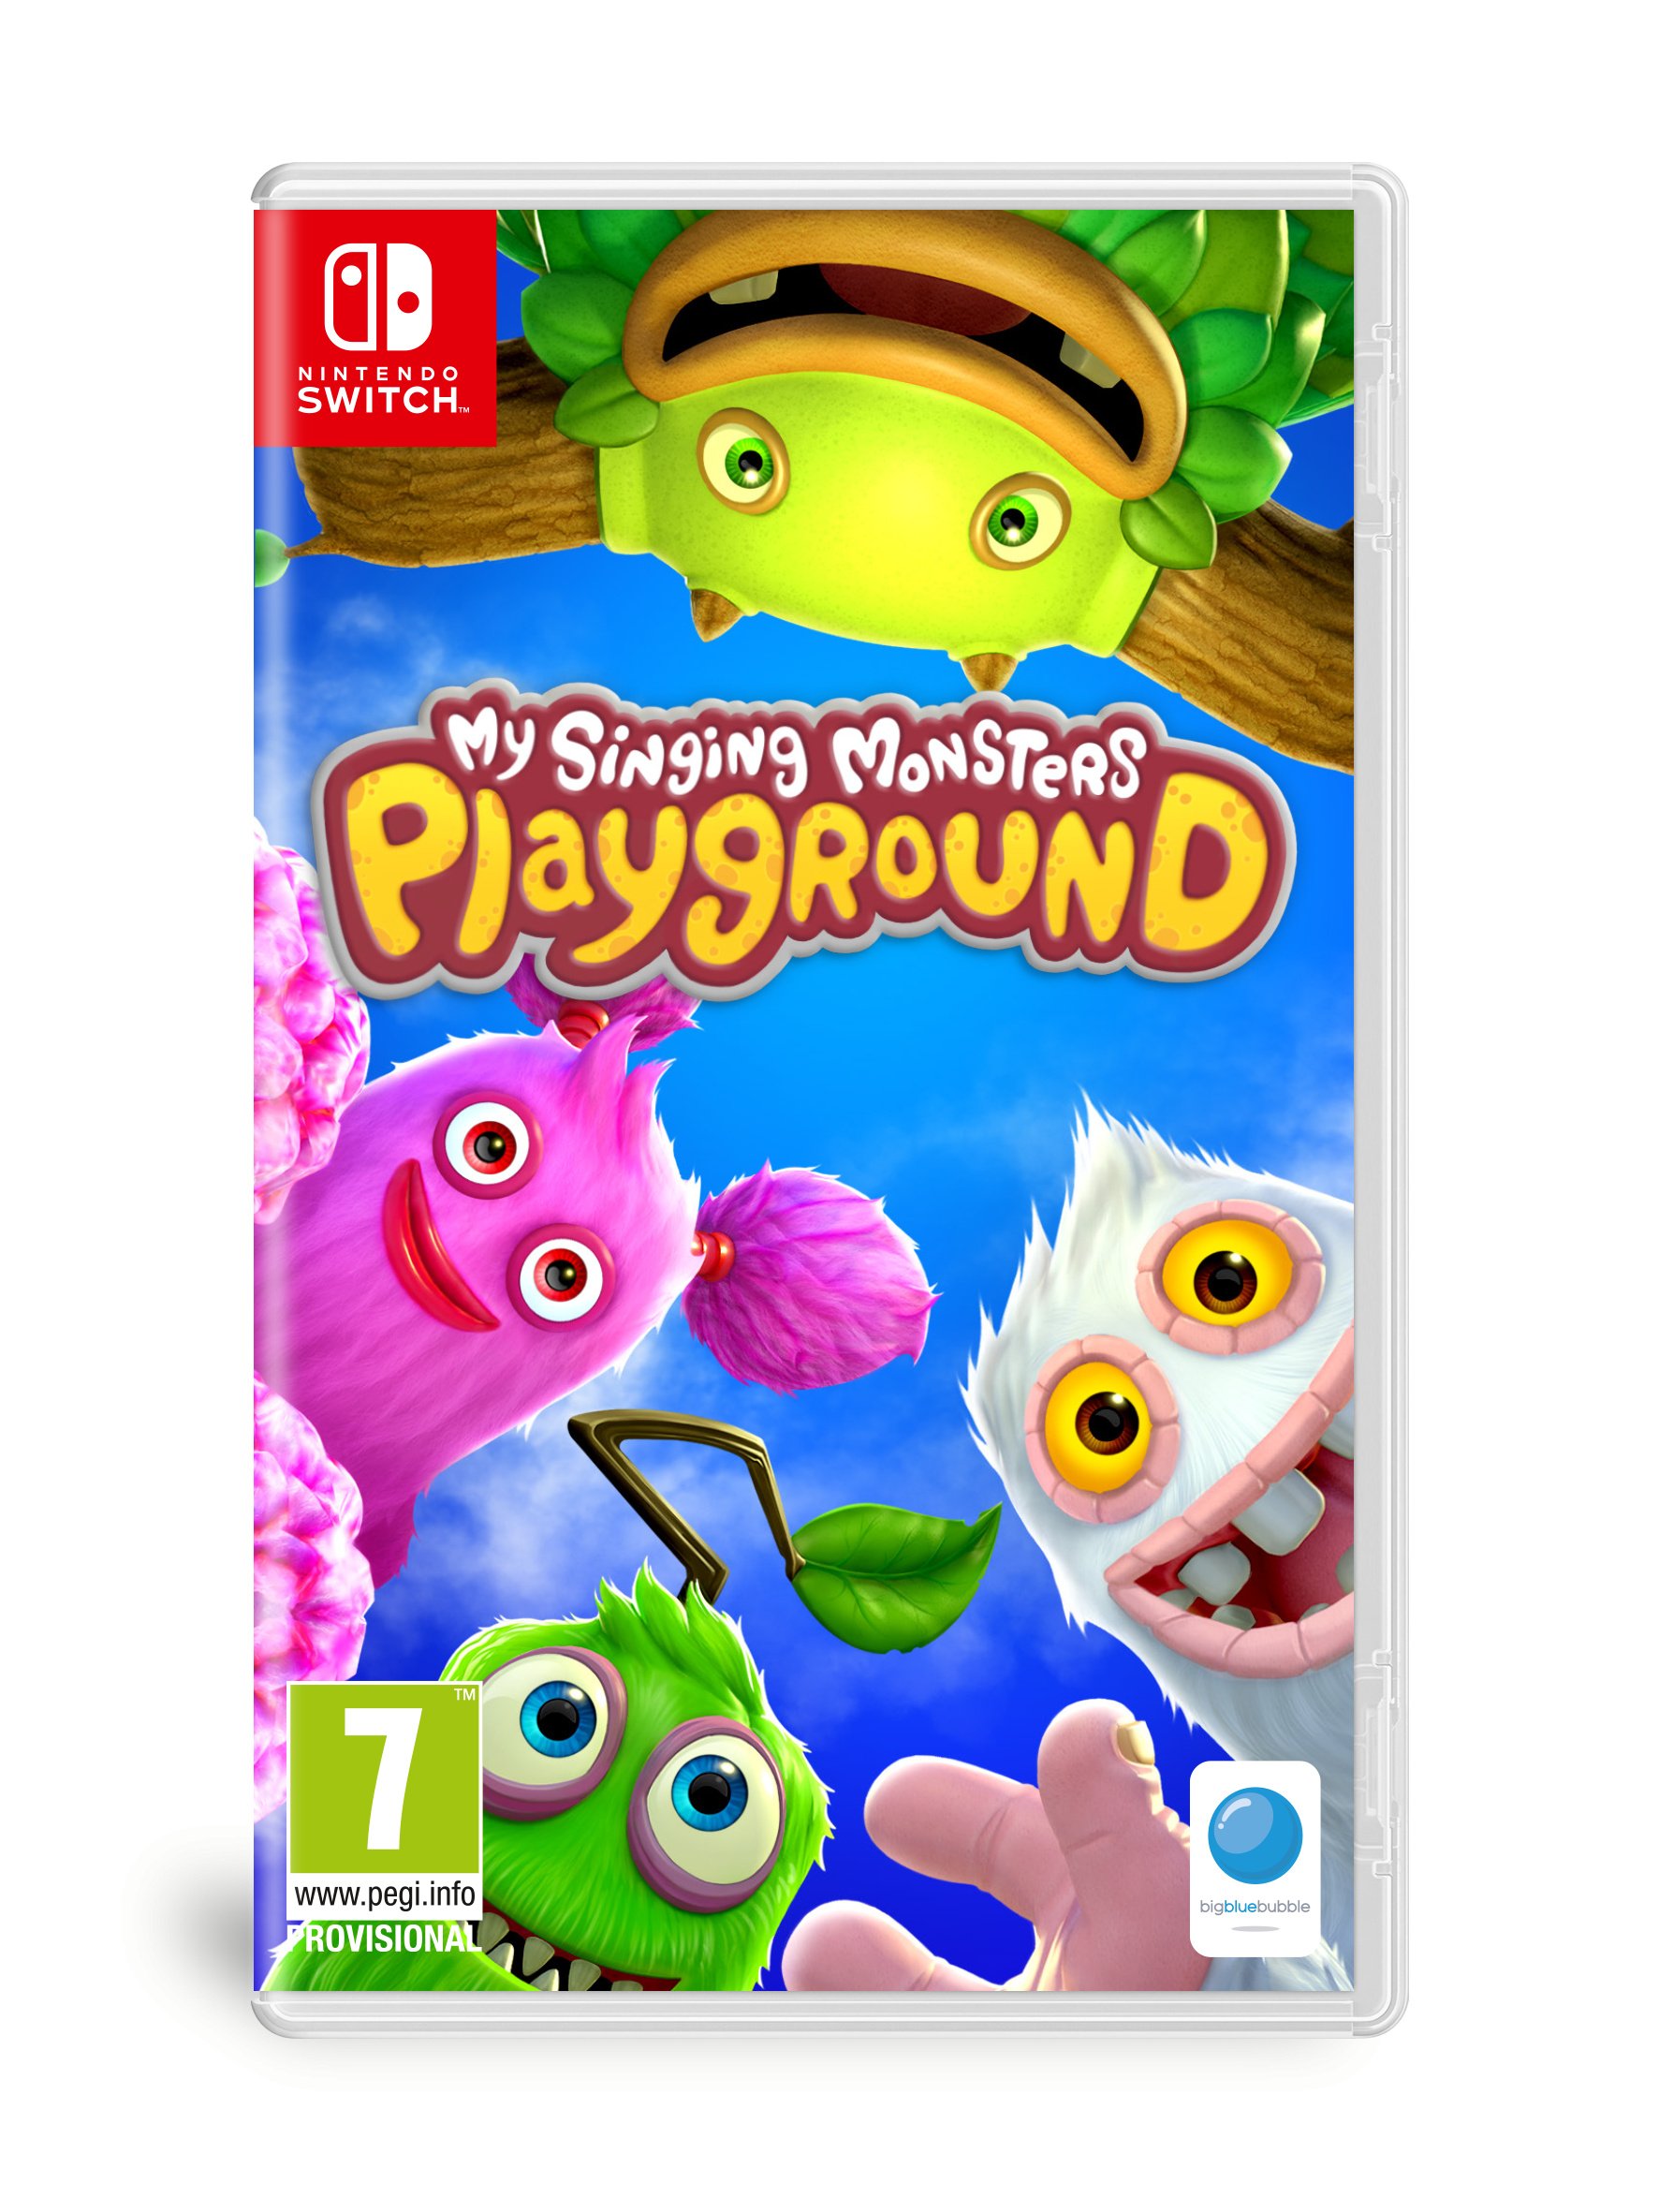 My Singing Monsters Playground Launches This November, And Switch Is